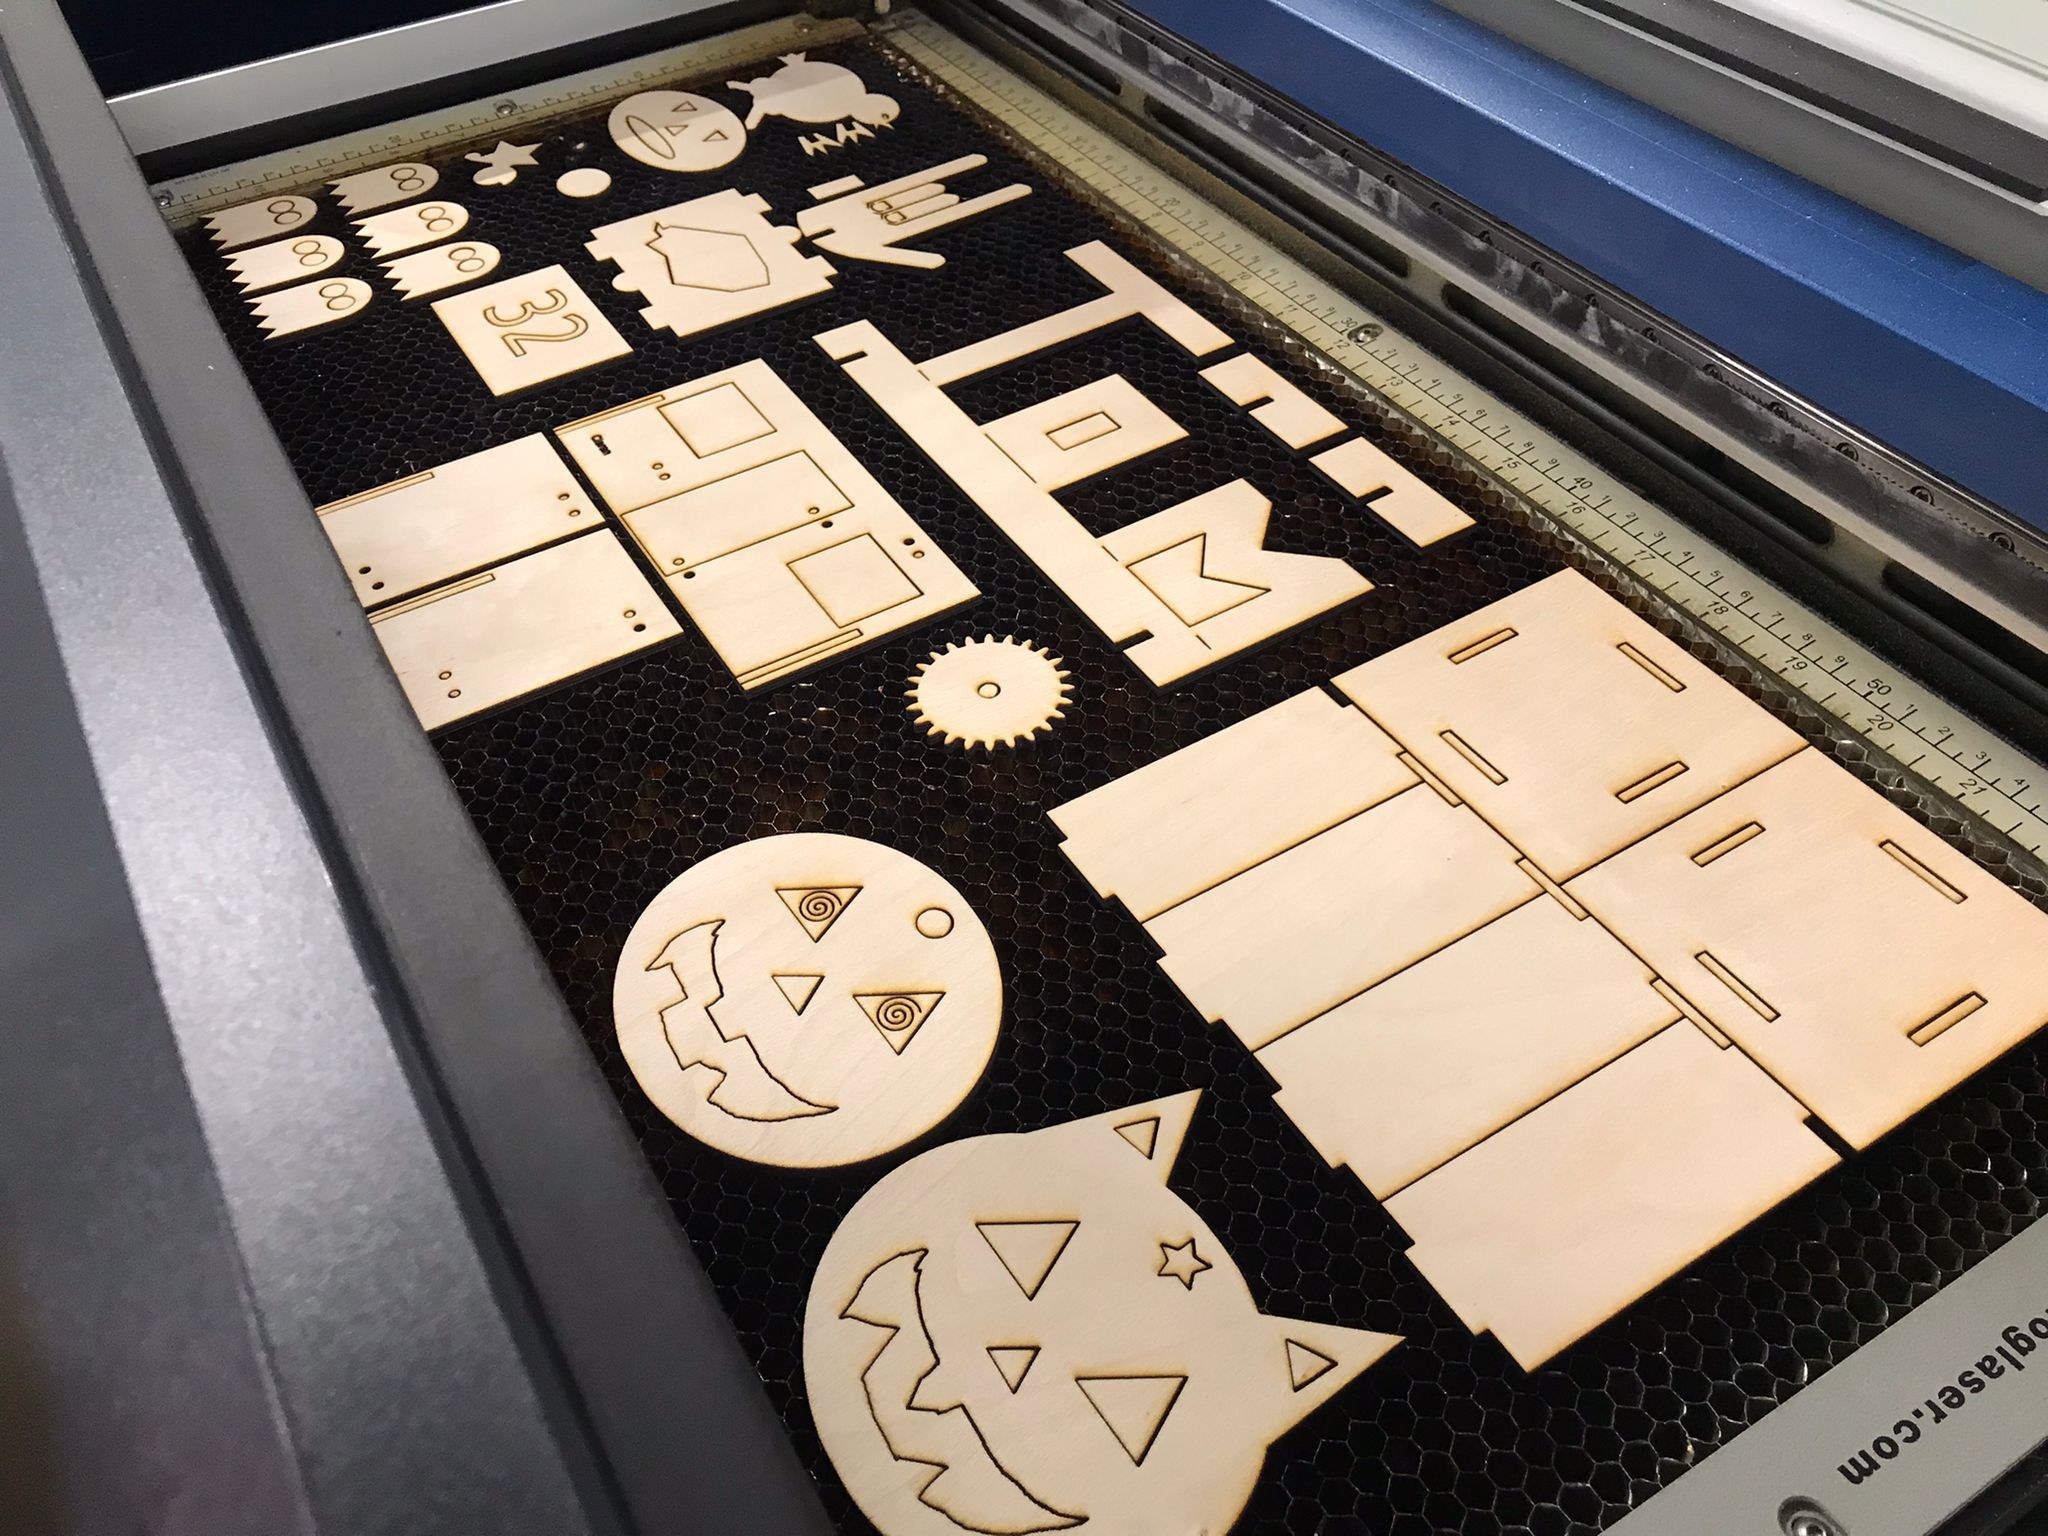 The final cut pieces on the bed of the laser cutter